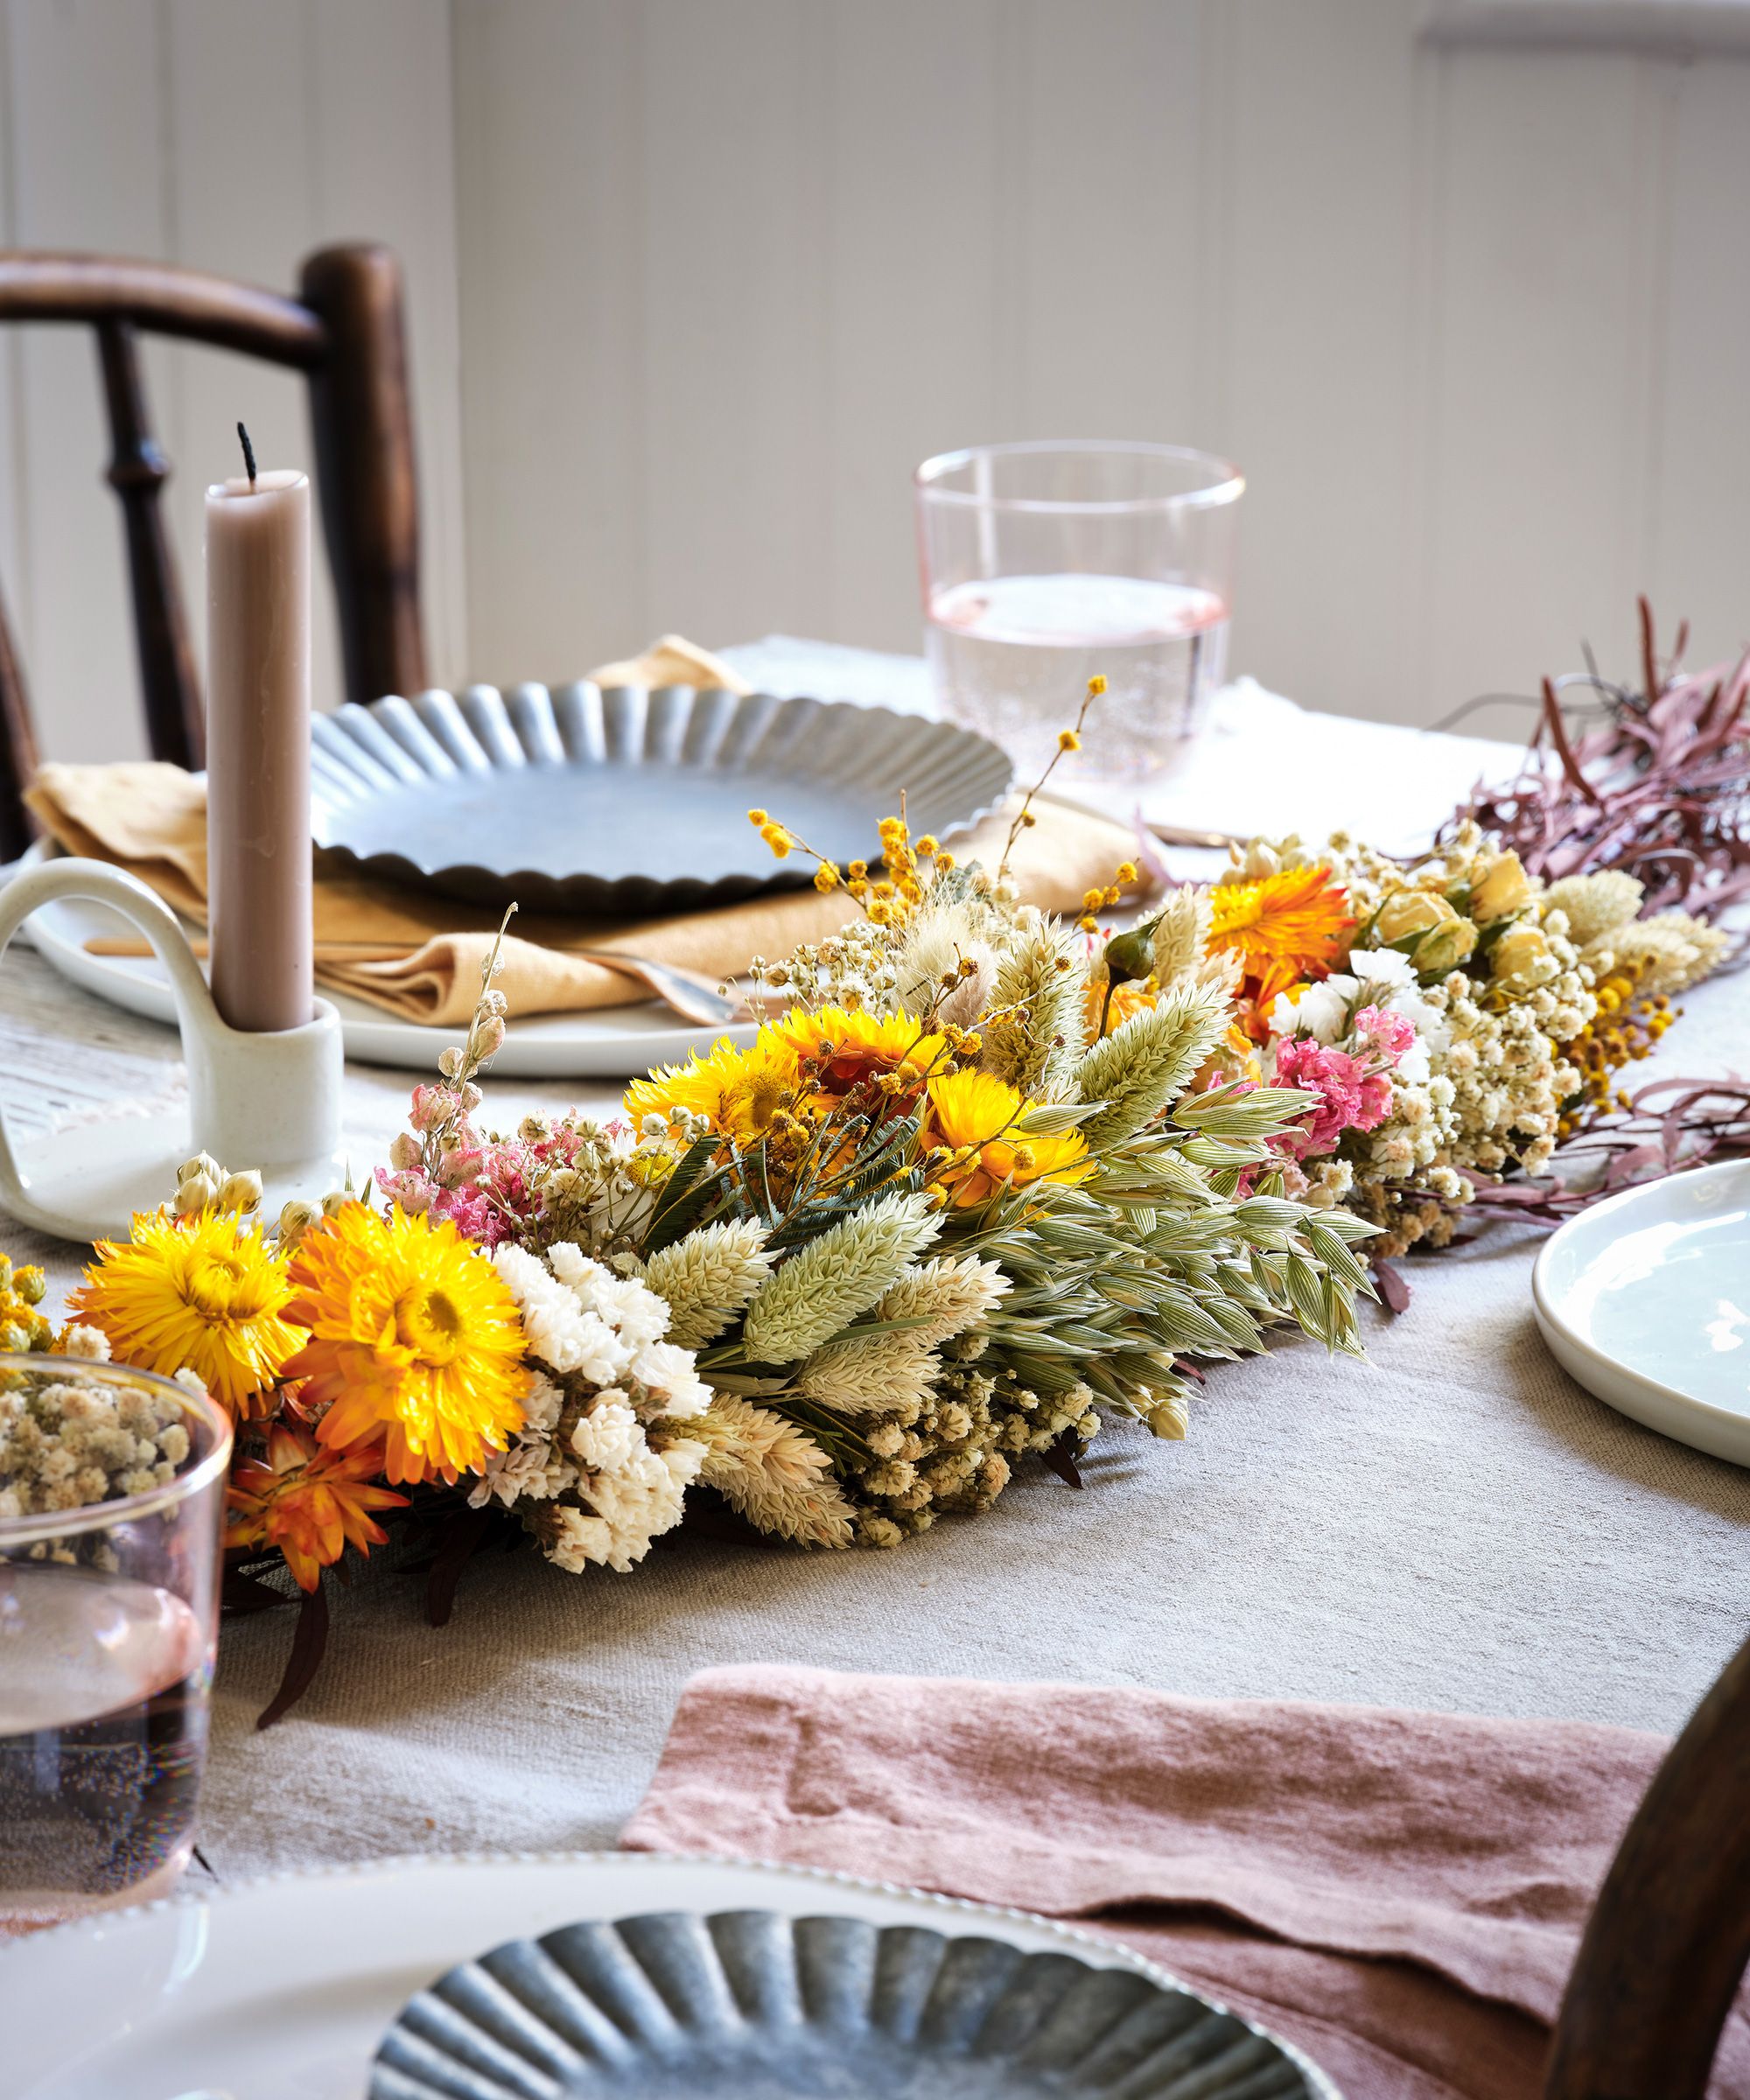 Dried flower arrangements: 6 gorgeous ways with dried flowers | Homes ...